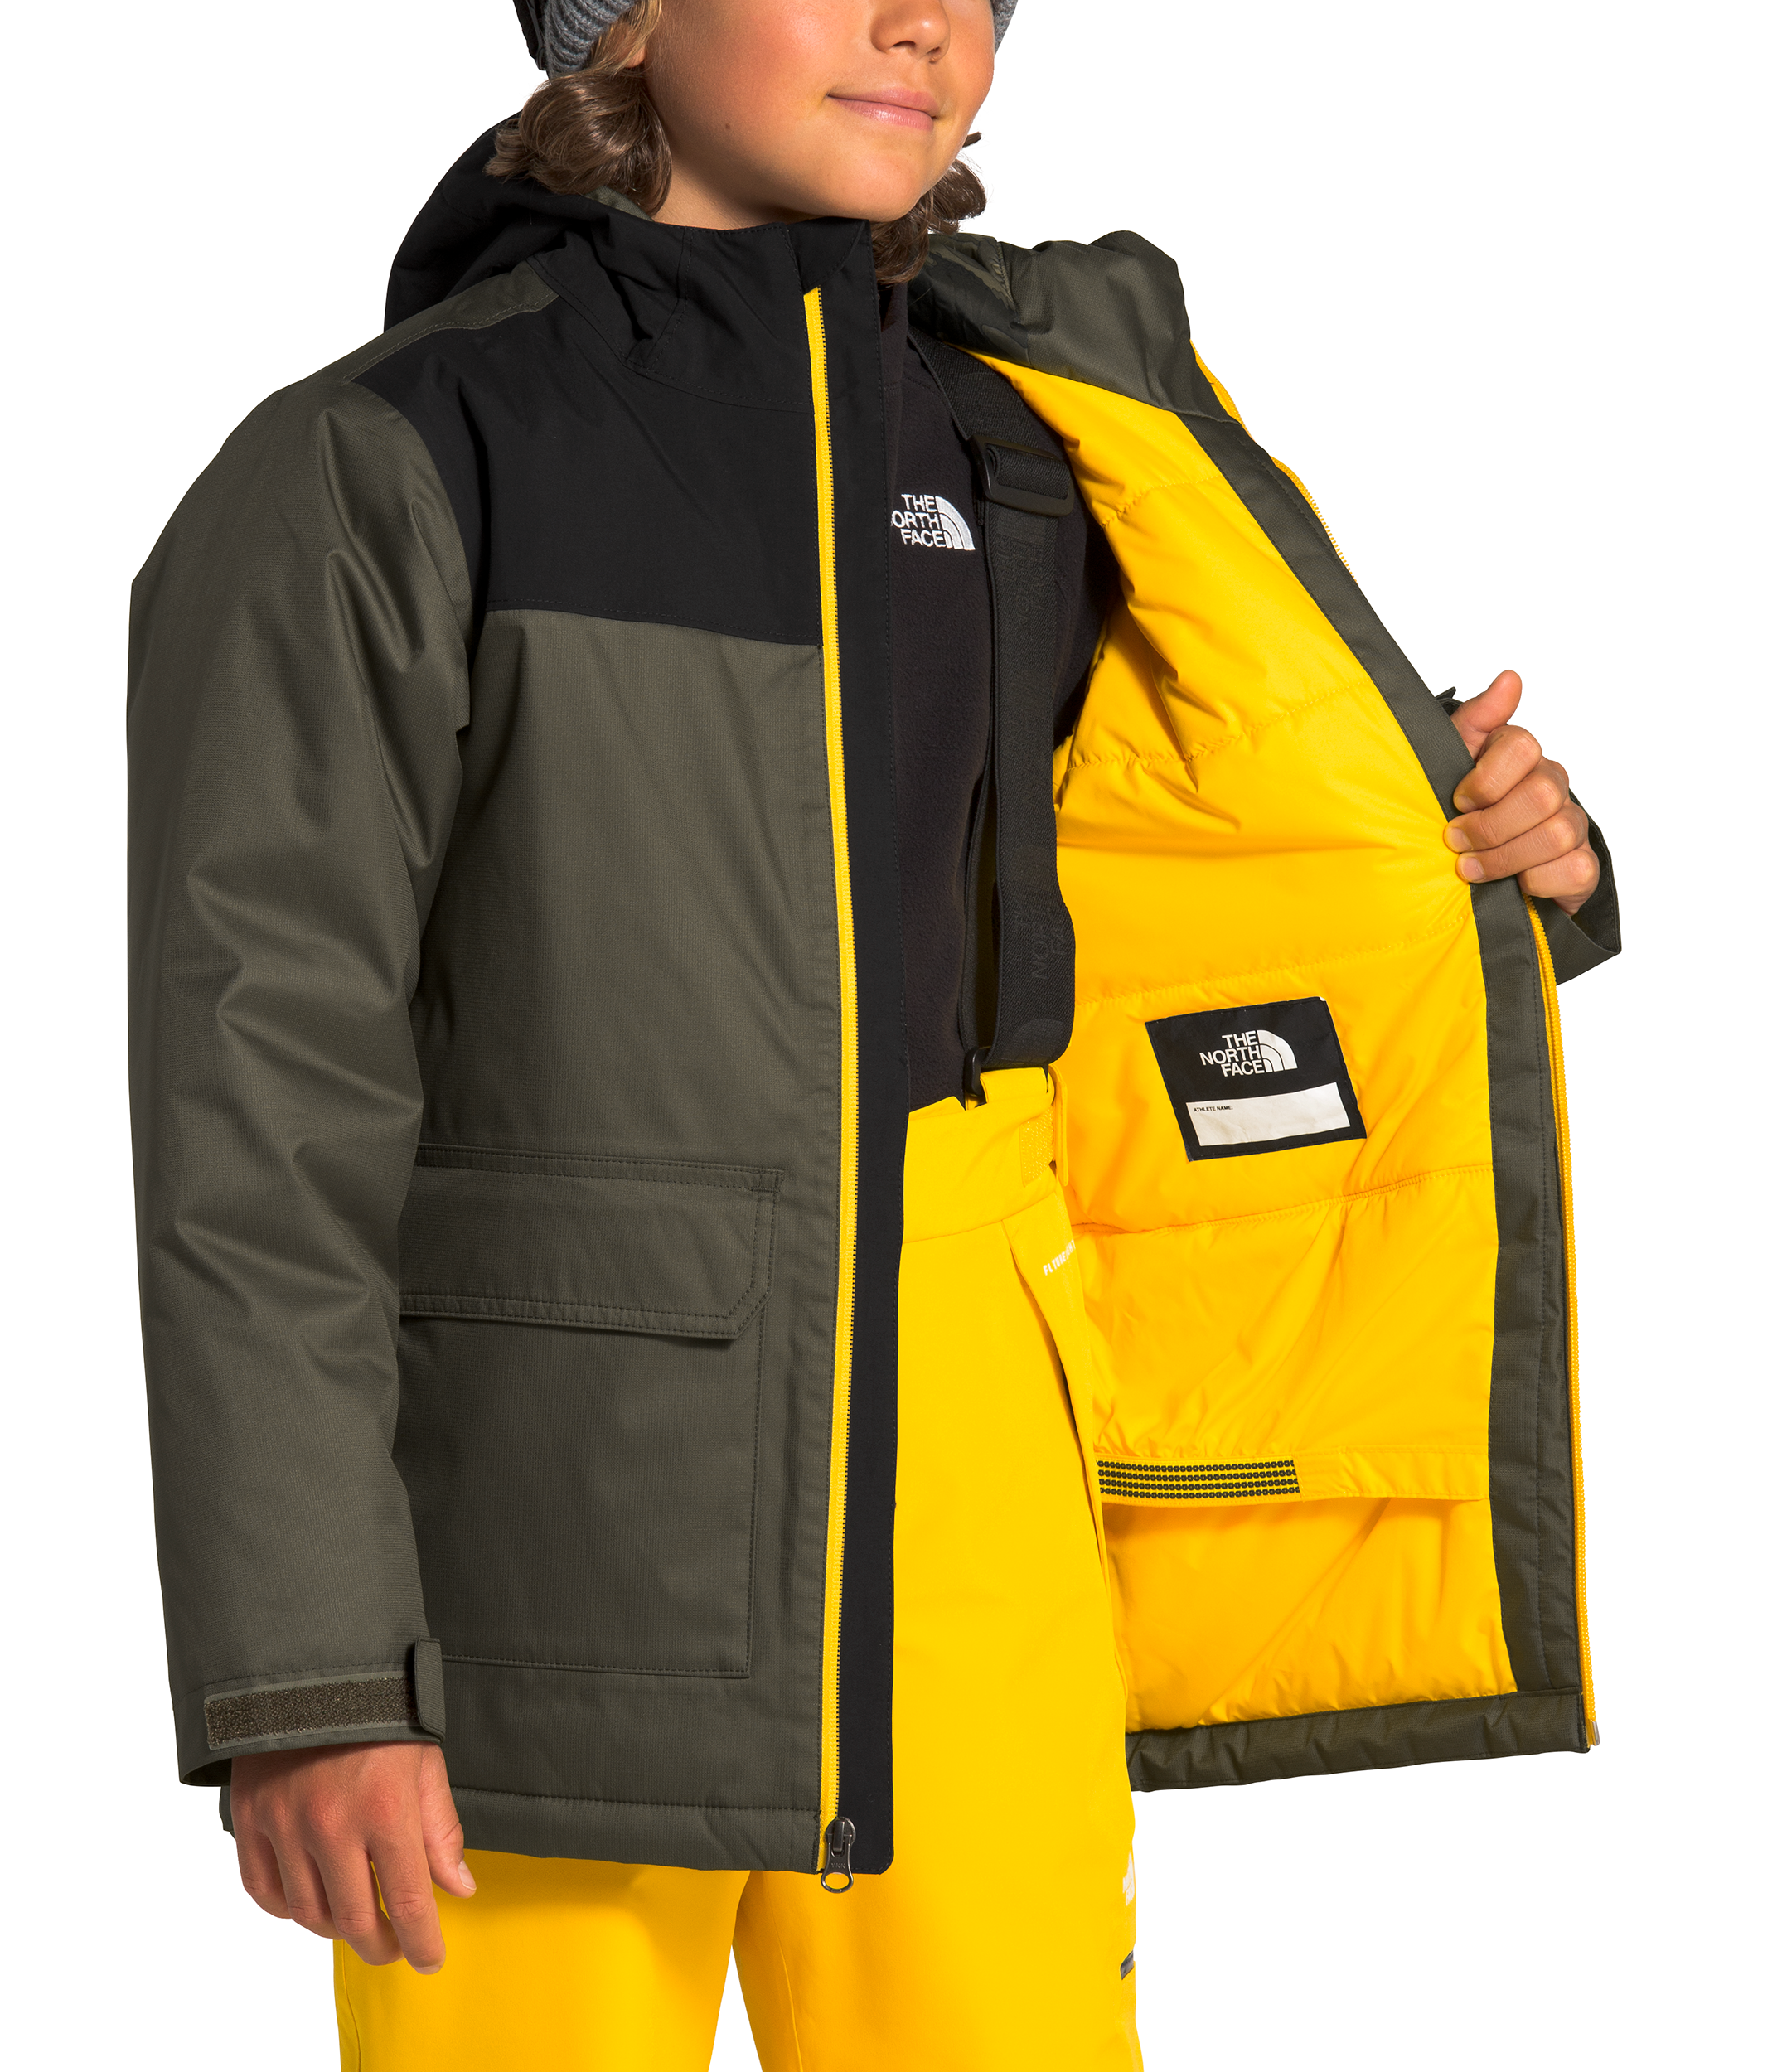 The North Face Boys Freedom Insulated Jacket '21